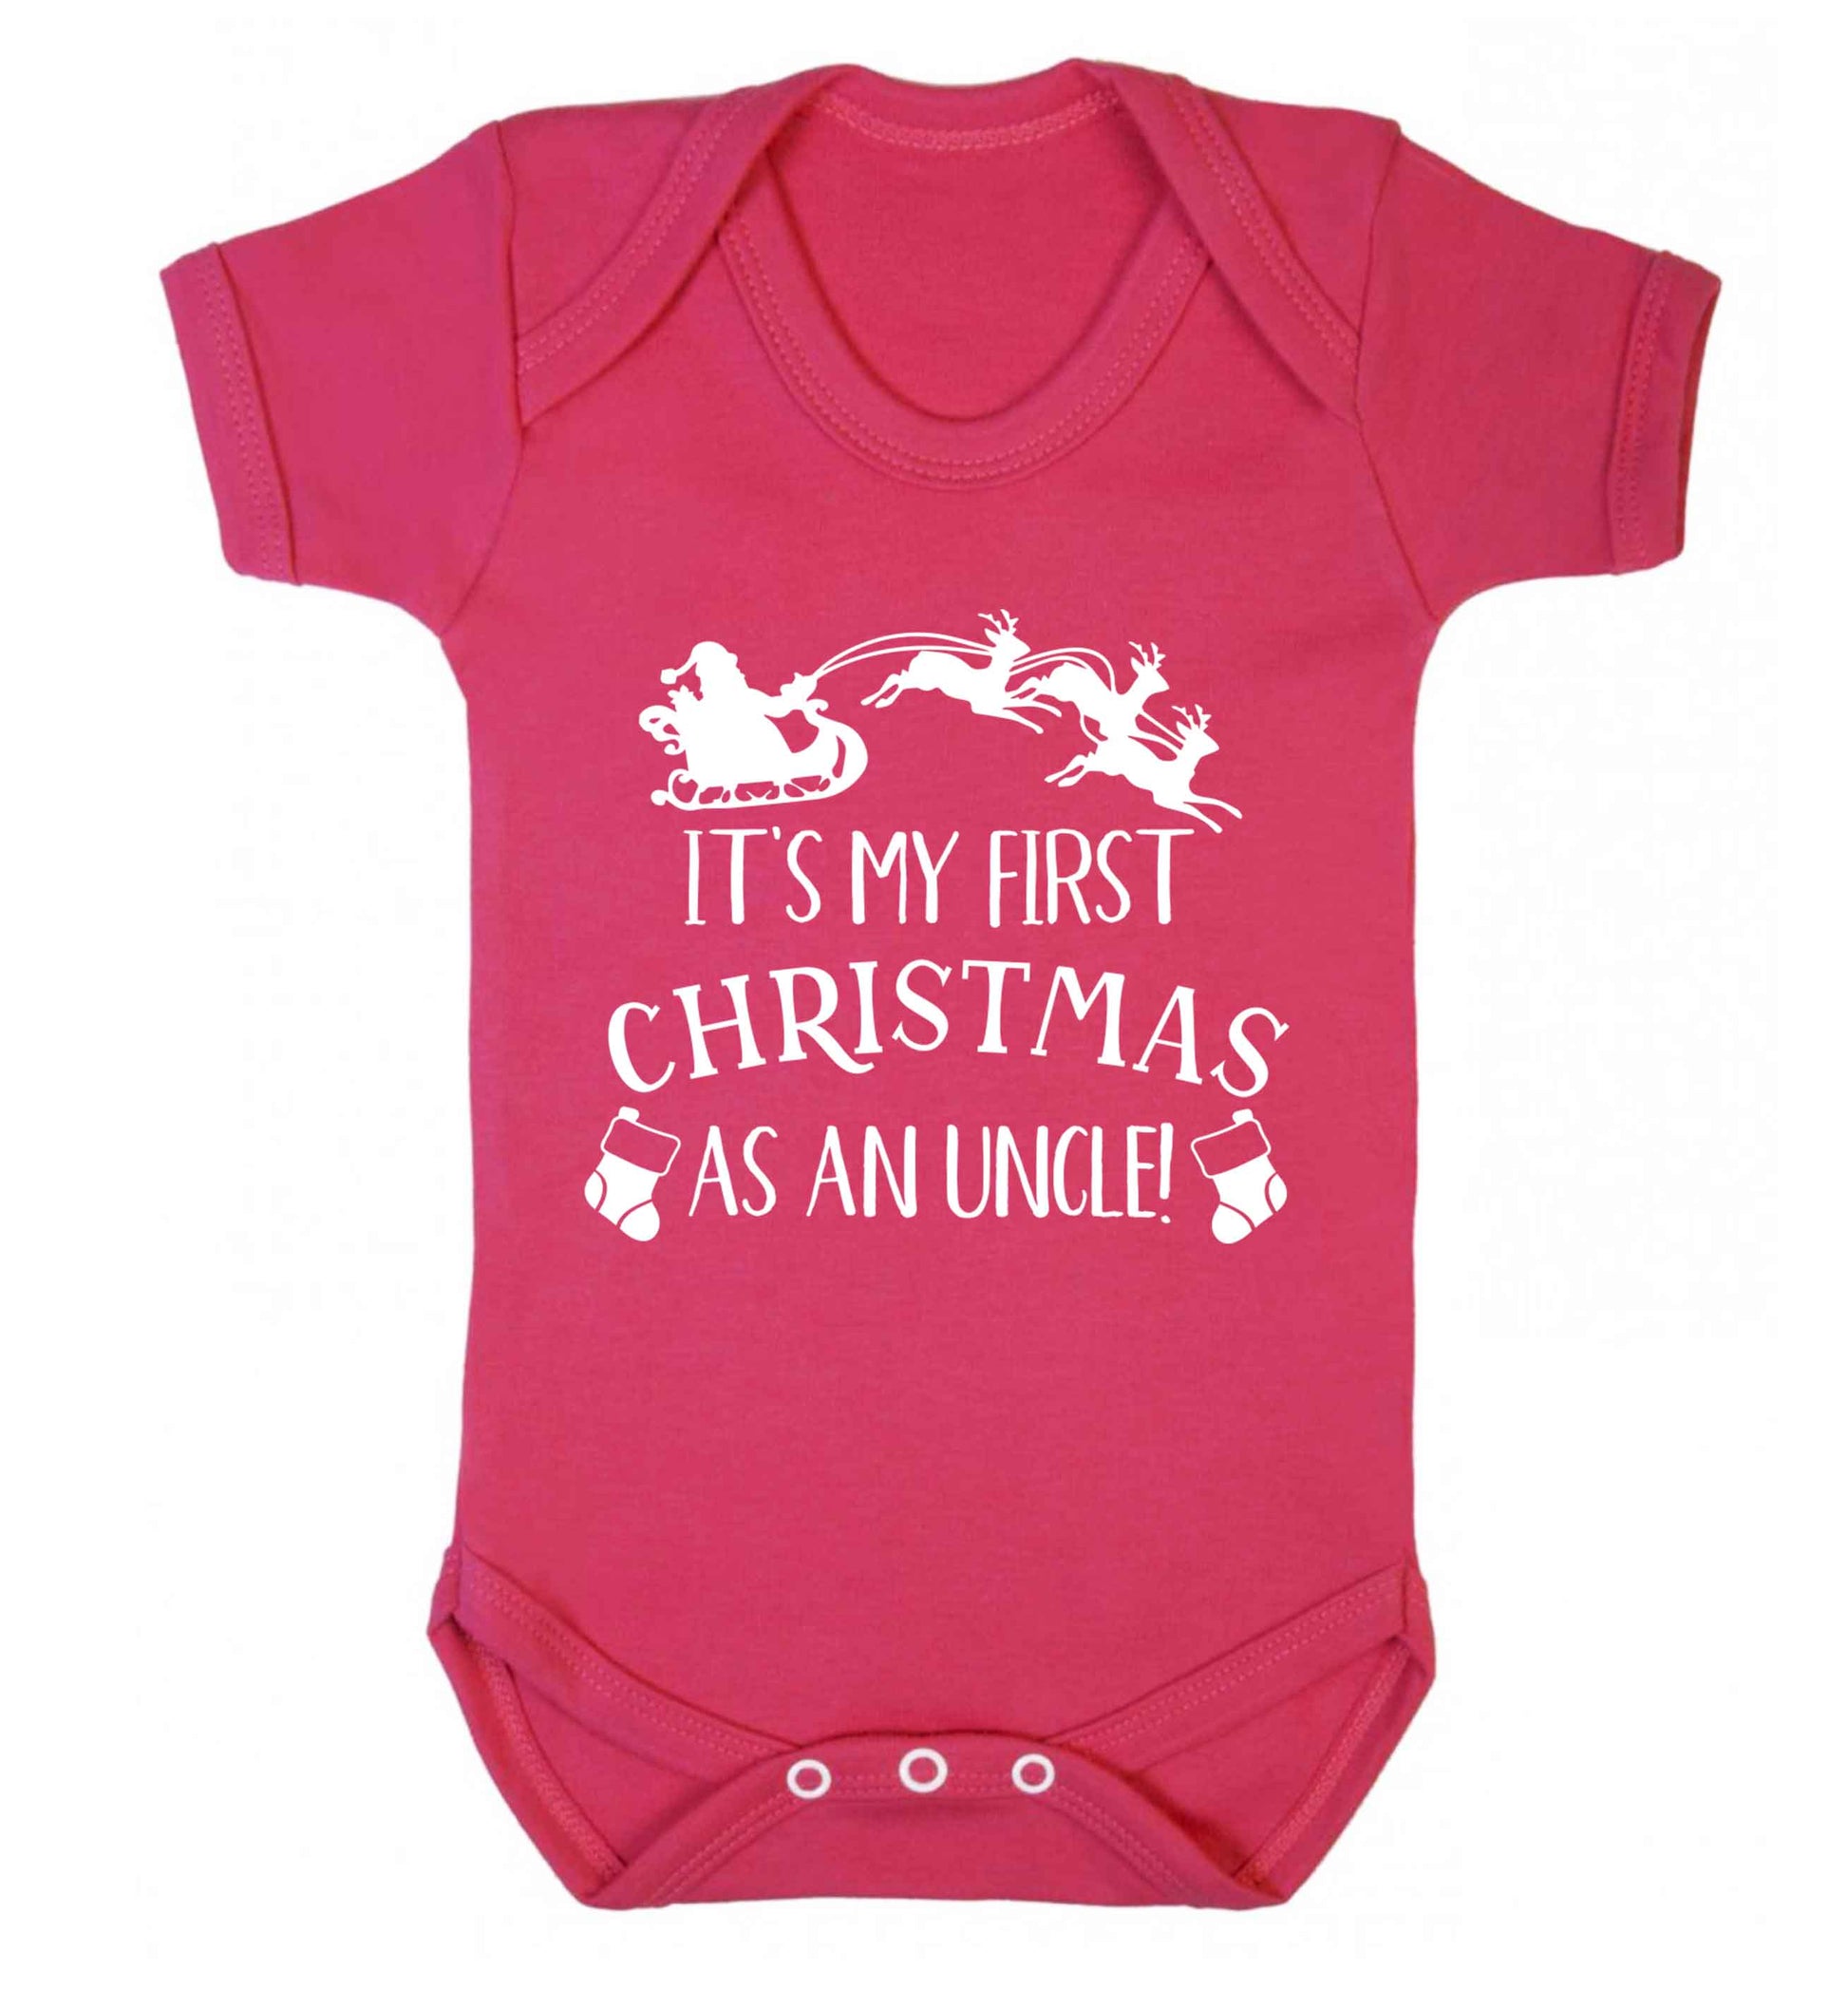 It's my first Christmas as an uncle! Baby Vest dark pink 18-24 months